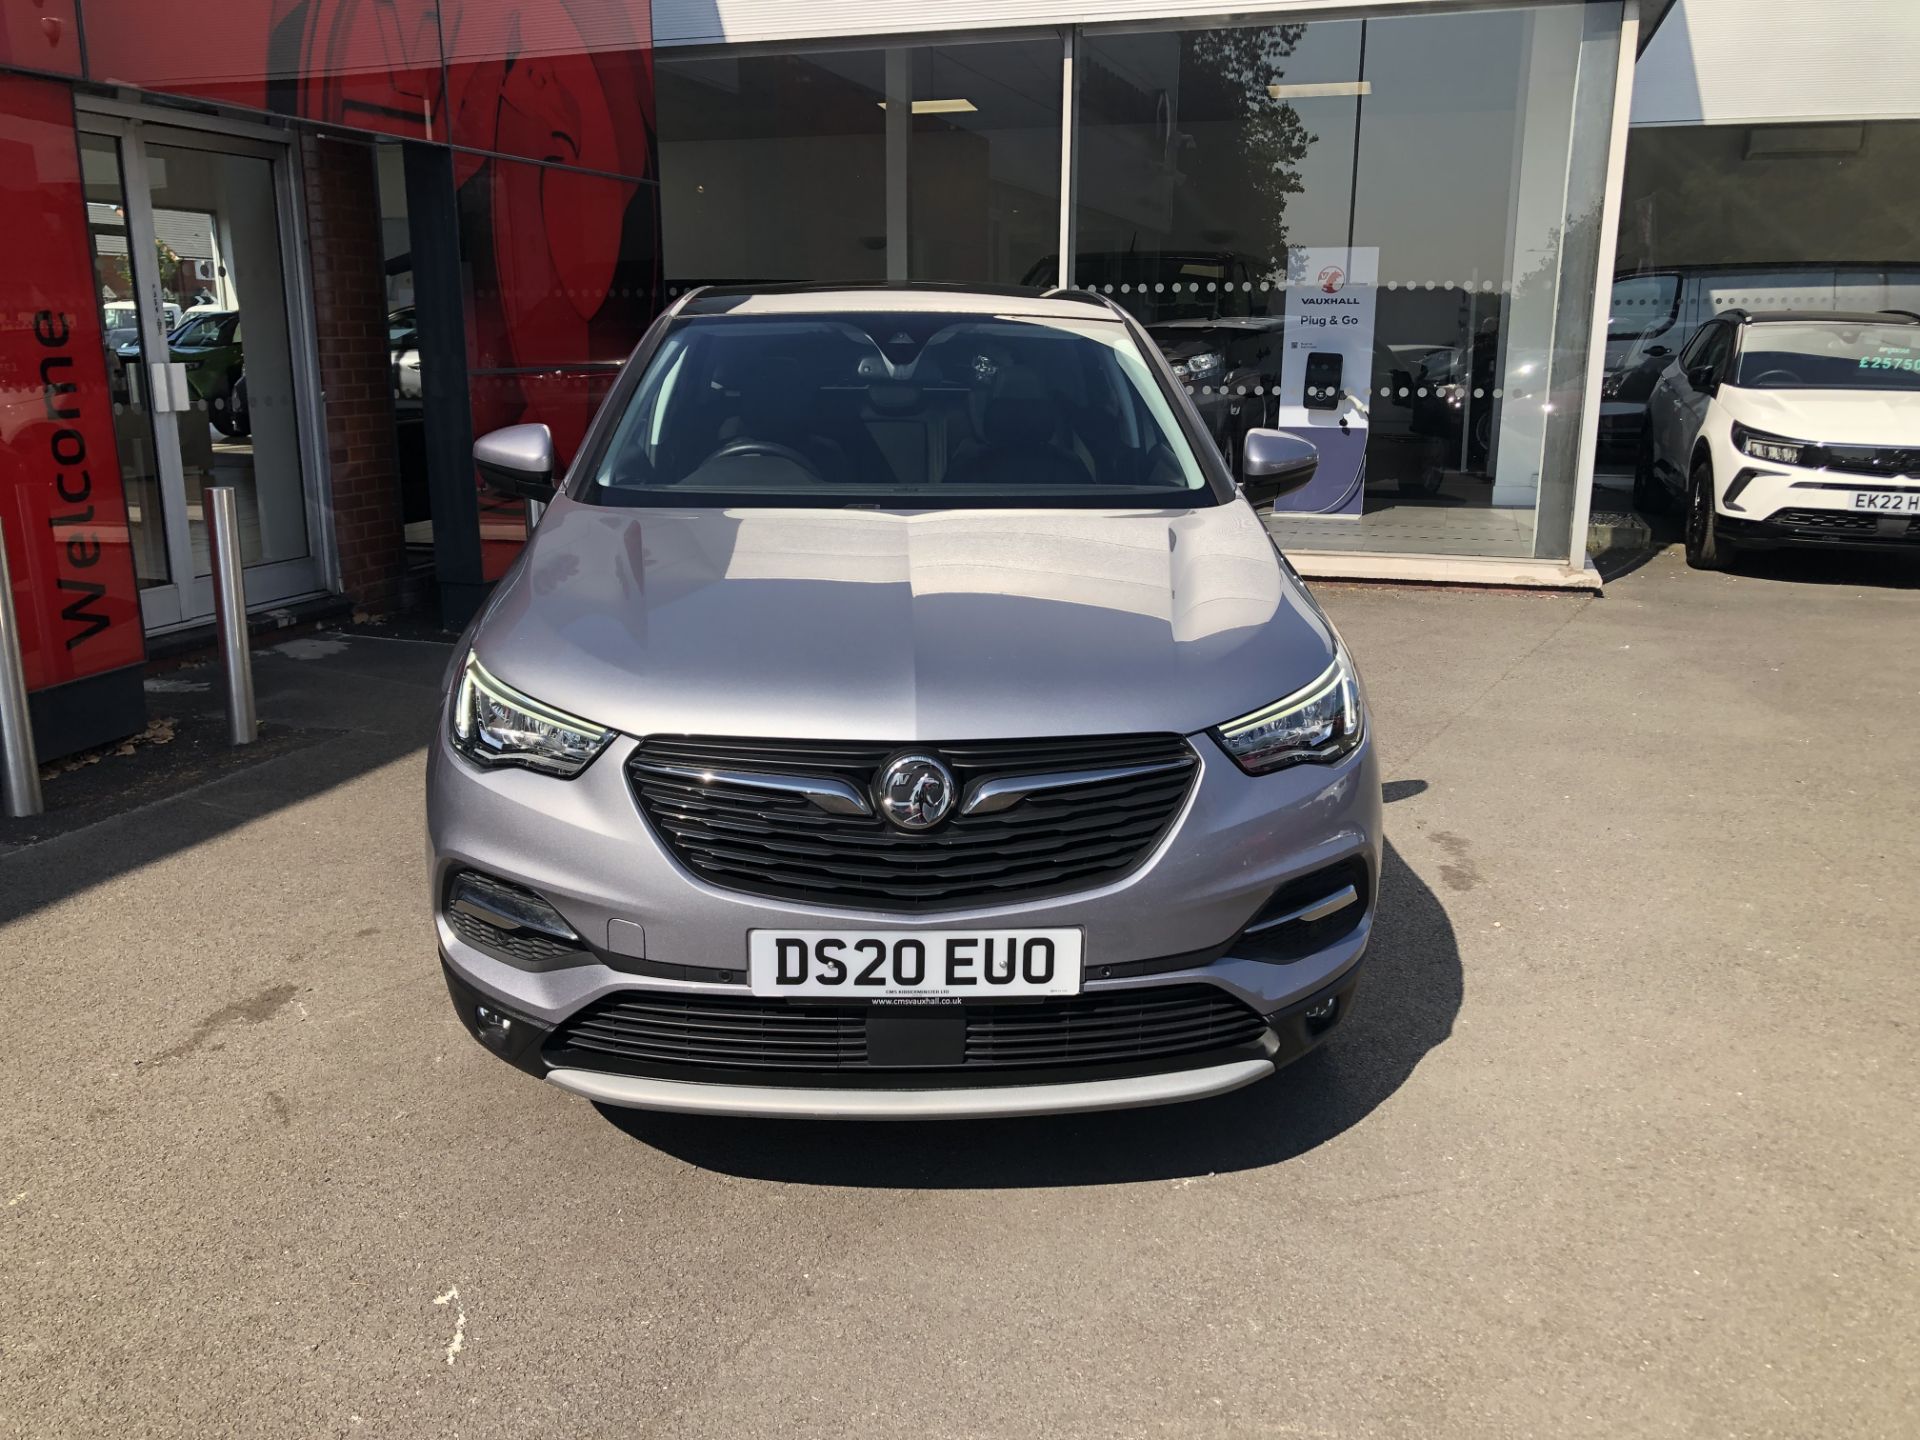 Vauxhall Grandland X 1.2T (130ps) Elite Nav 5dr Automatic, Registration: DS20EUO, Date First - Image 3 of 8